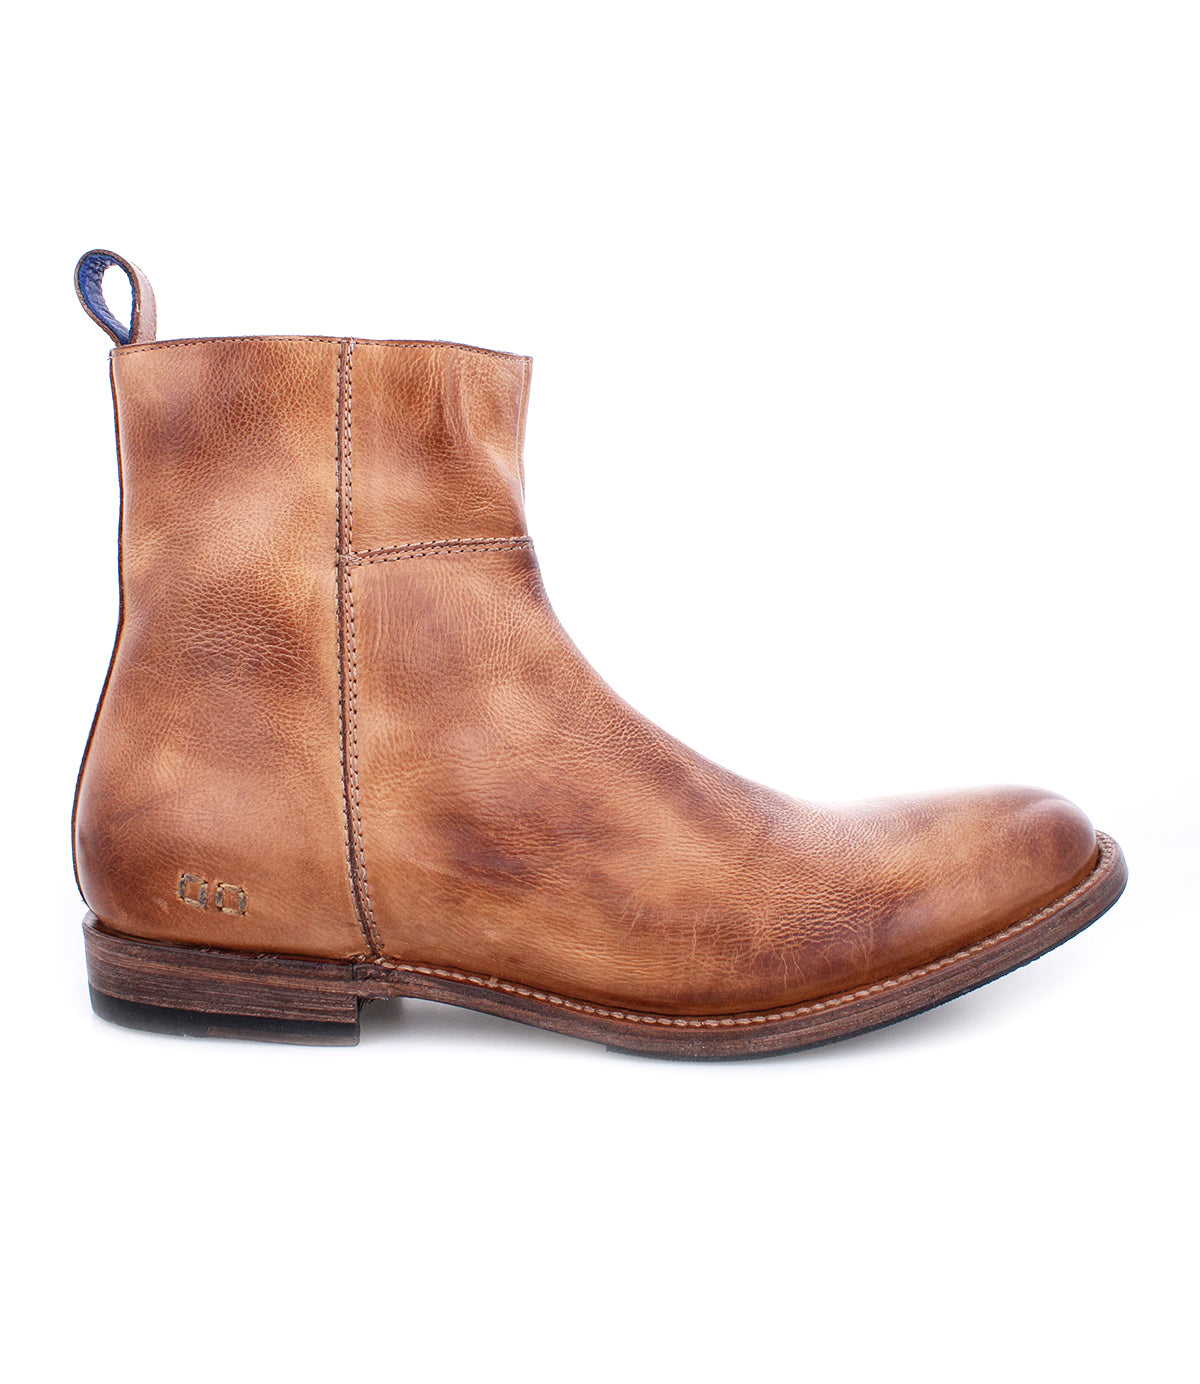 A comfortable tan leather ankle boot with a loop on the back, displayed on a white background.